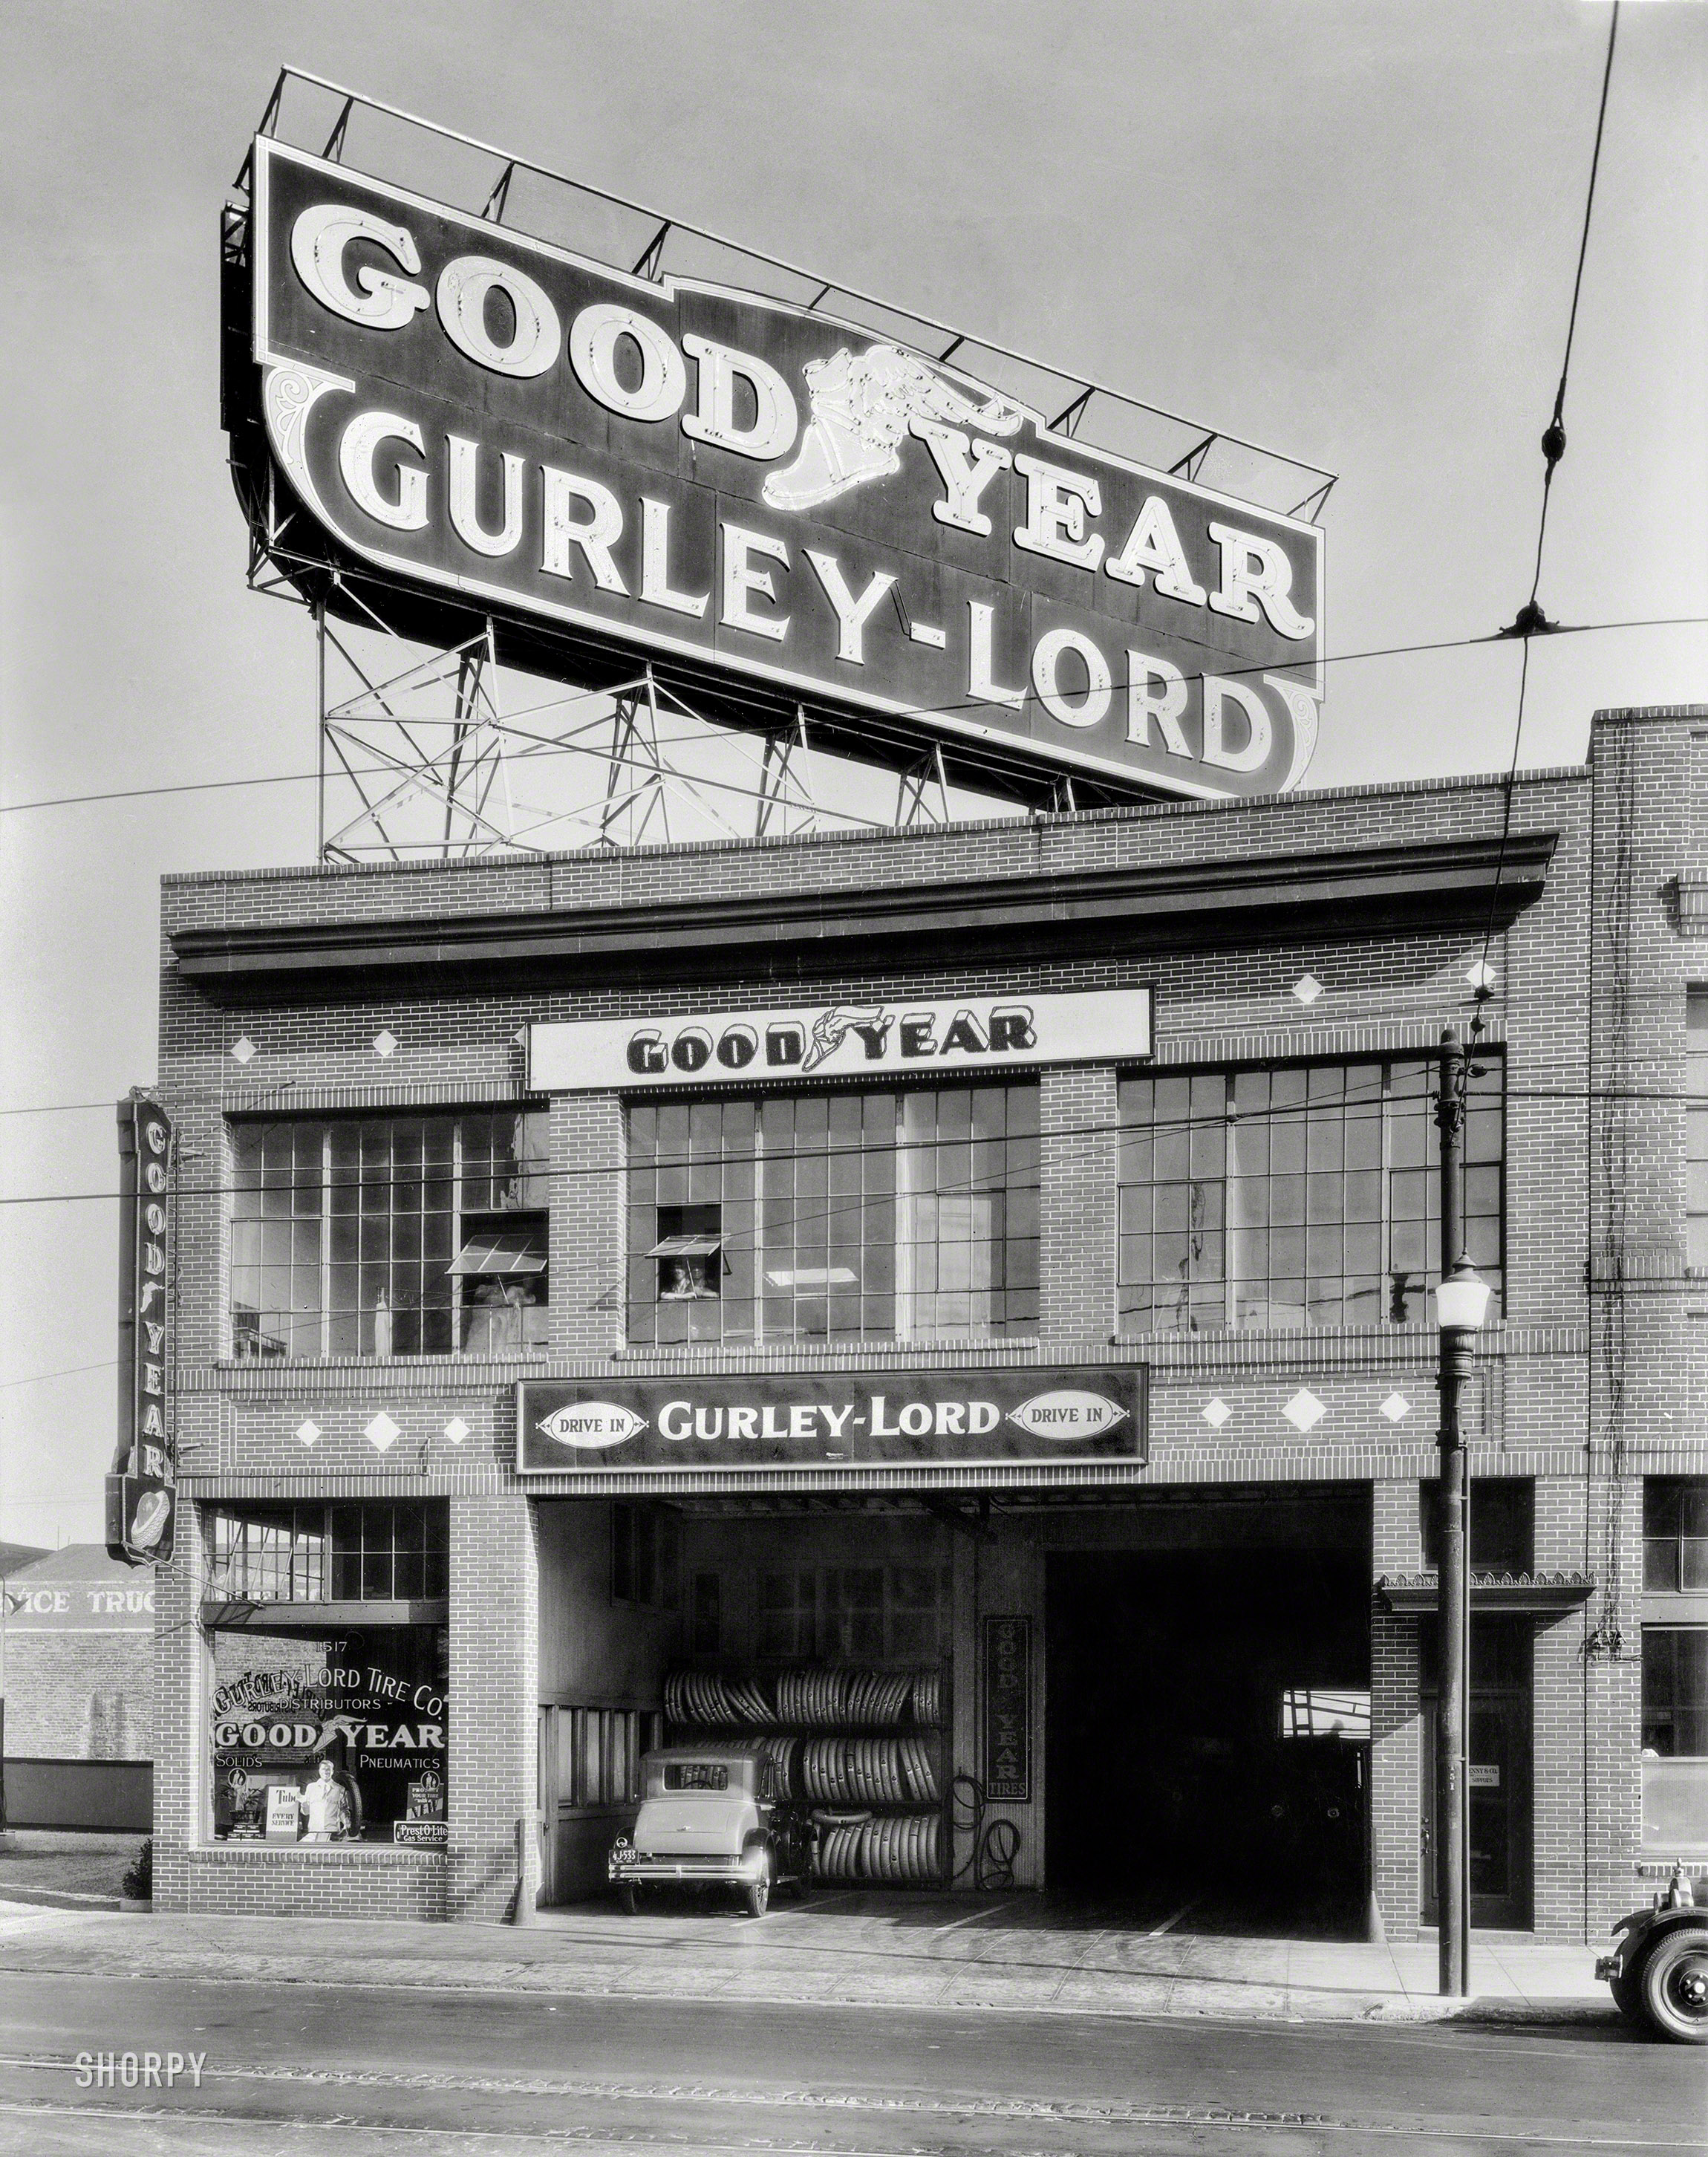 "Gurley-Lord service station, San Francisco, 1929." One of eight 8x10 negatives showing rubber-related activities at Goodyear tire dealers. View full size.